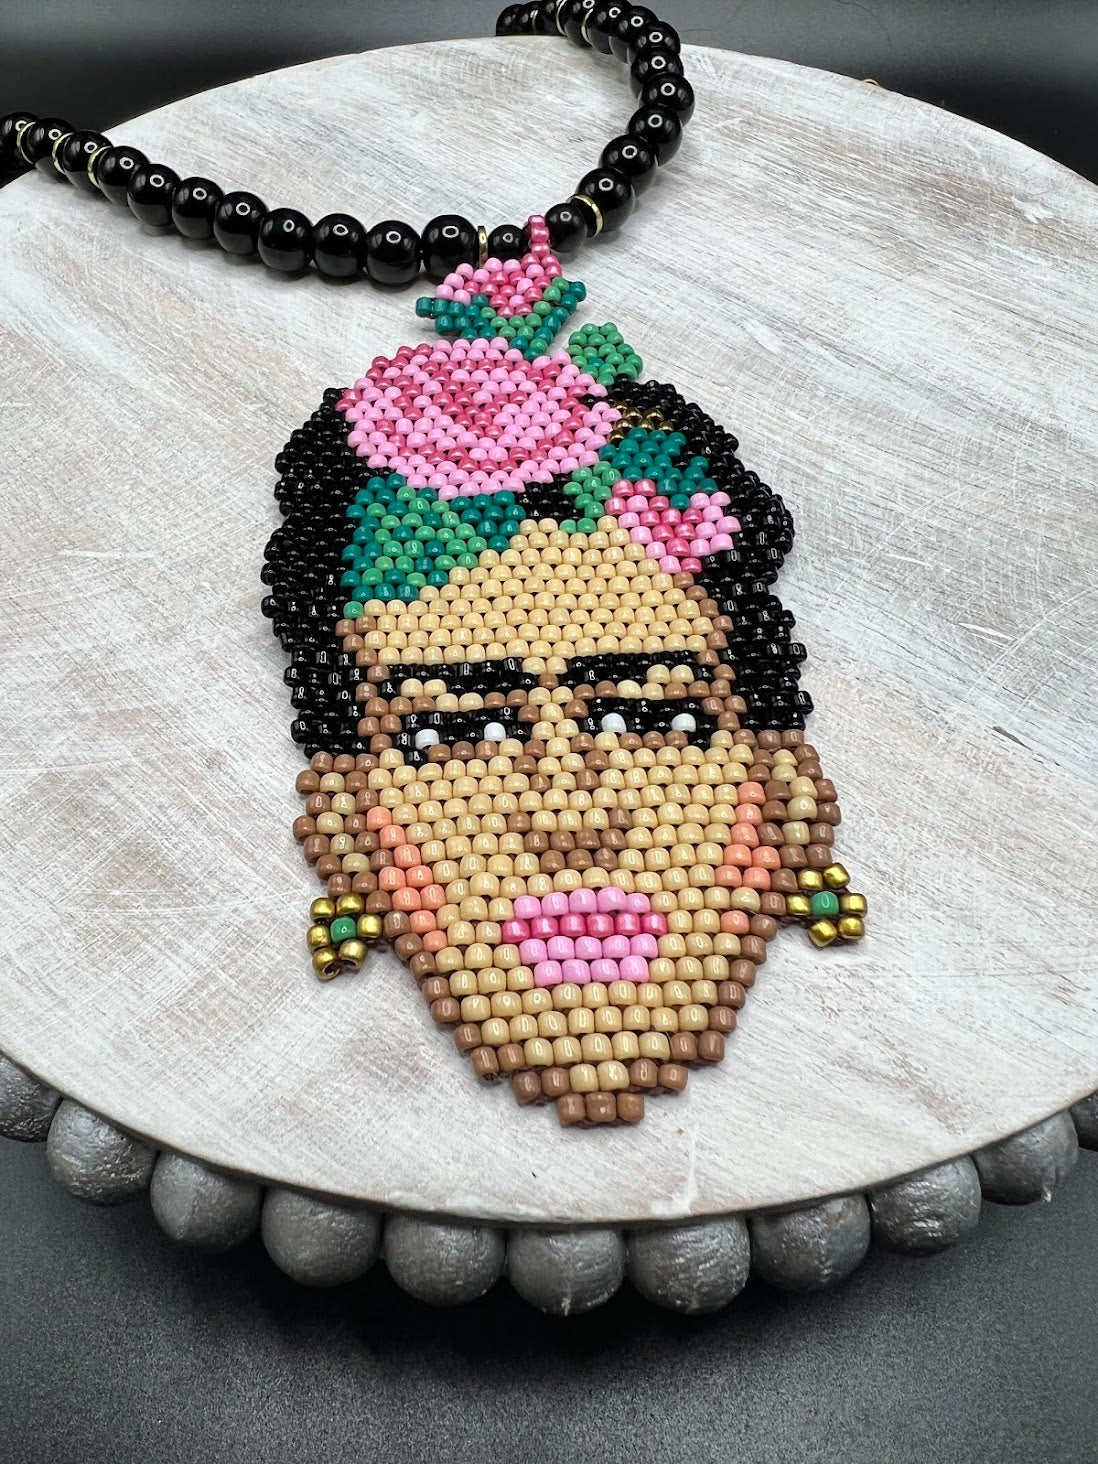 Frida Kahlo Face Pendant Necklace with Loom Bead